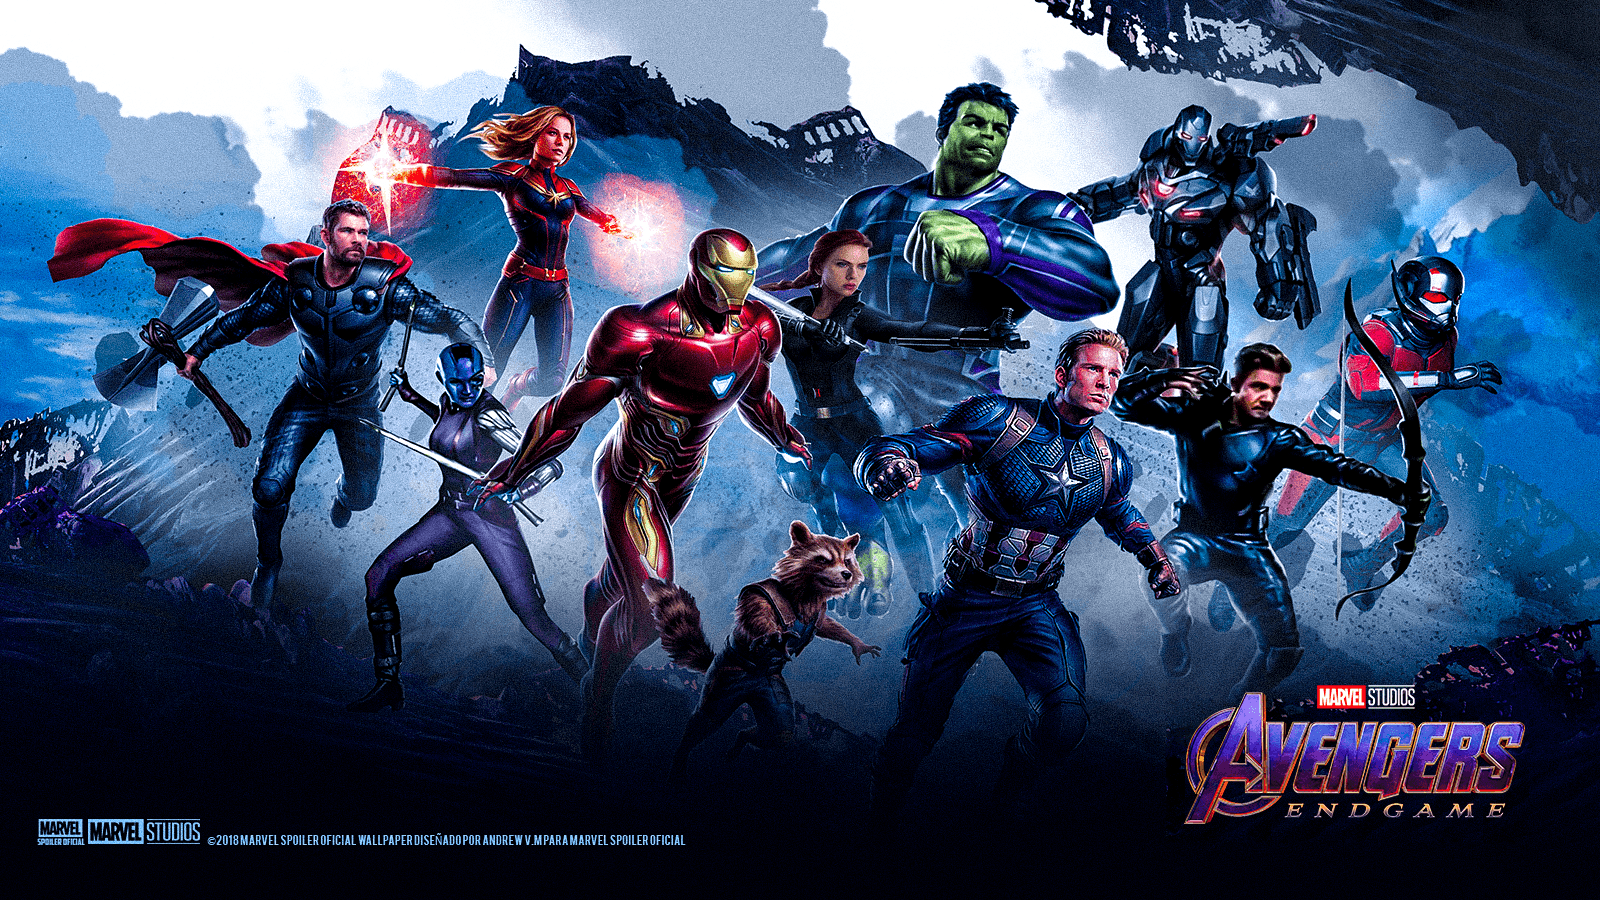 Avengers 4 End Game Latest Wallpaper In HD 4K Iron Man, Ronin